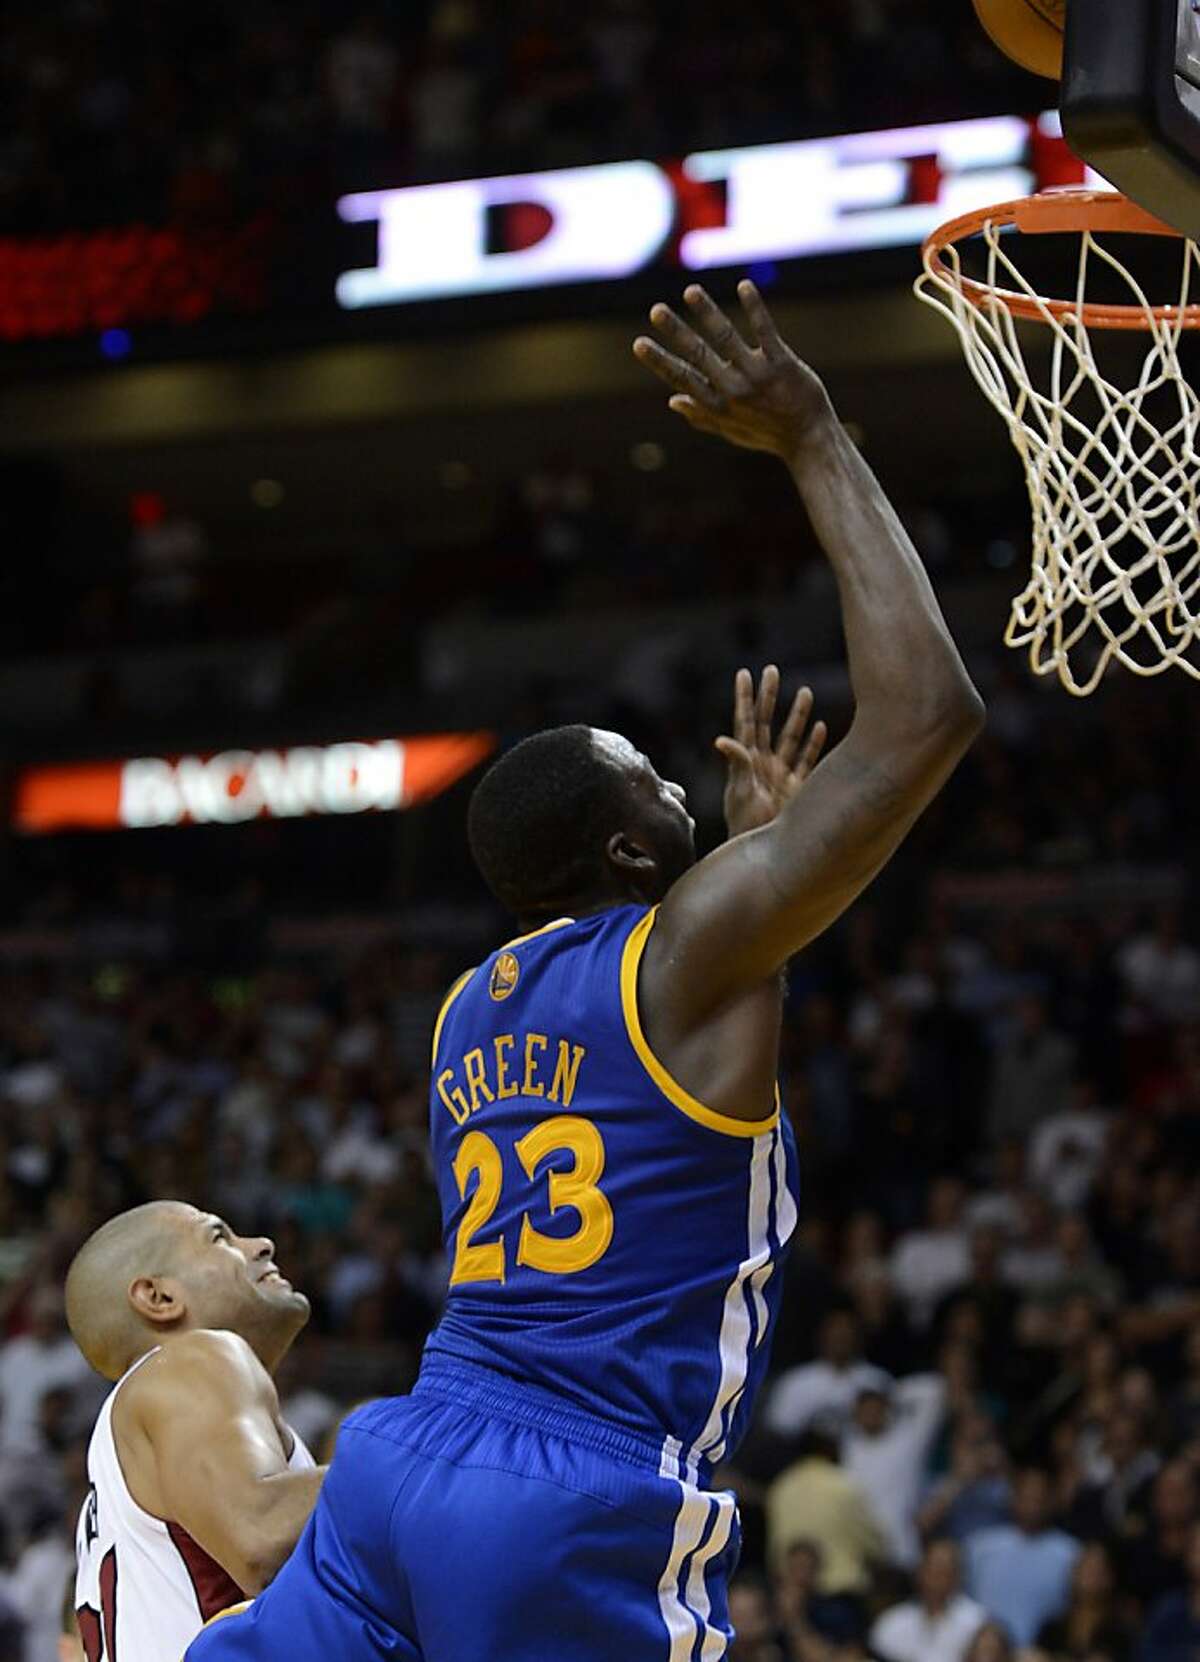 Golden State Warriors' Draymond Green (23) hits the game-winning basket against Miami Heat's Shane Battier, left, during an NBA basketball game on Wednesday, Dec. 12, 2012, in Miami. The Warriors won 97-95. (AP Photo/Rhona Wise)